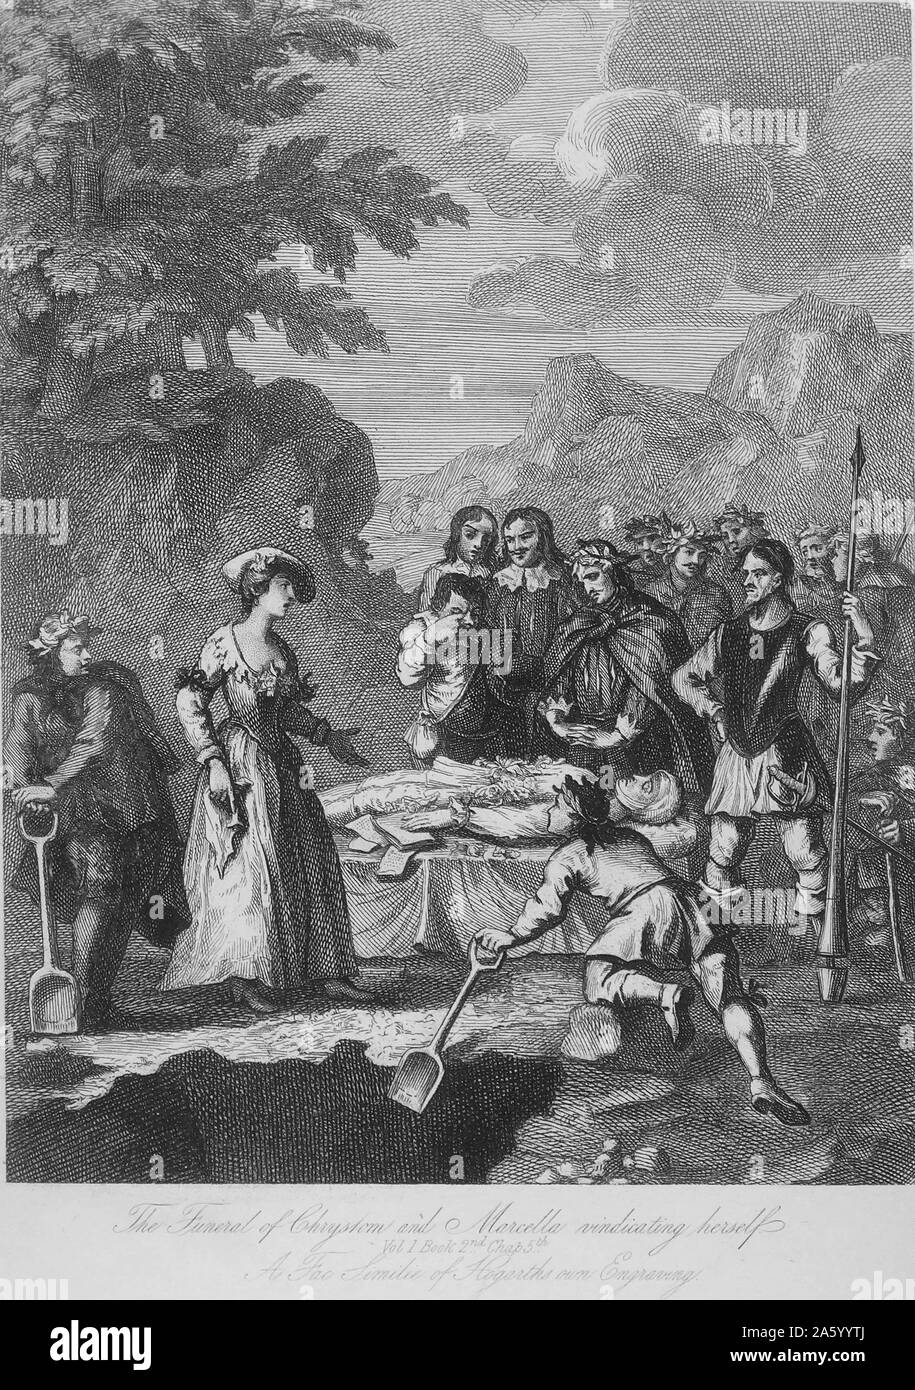 Engraving by William Hogarth (1697-1764) English painter, printmaker, pictorial satirist, social critic, and editorial cartoonist who has been credited with pioneering western sequential art. Dated 18th Century. Stock Photo